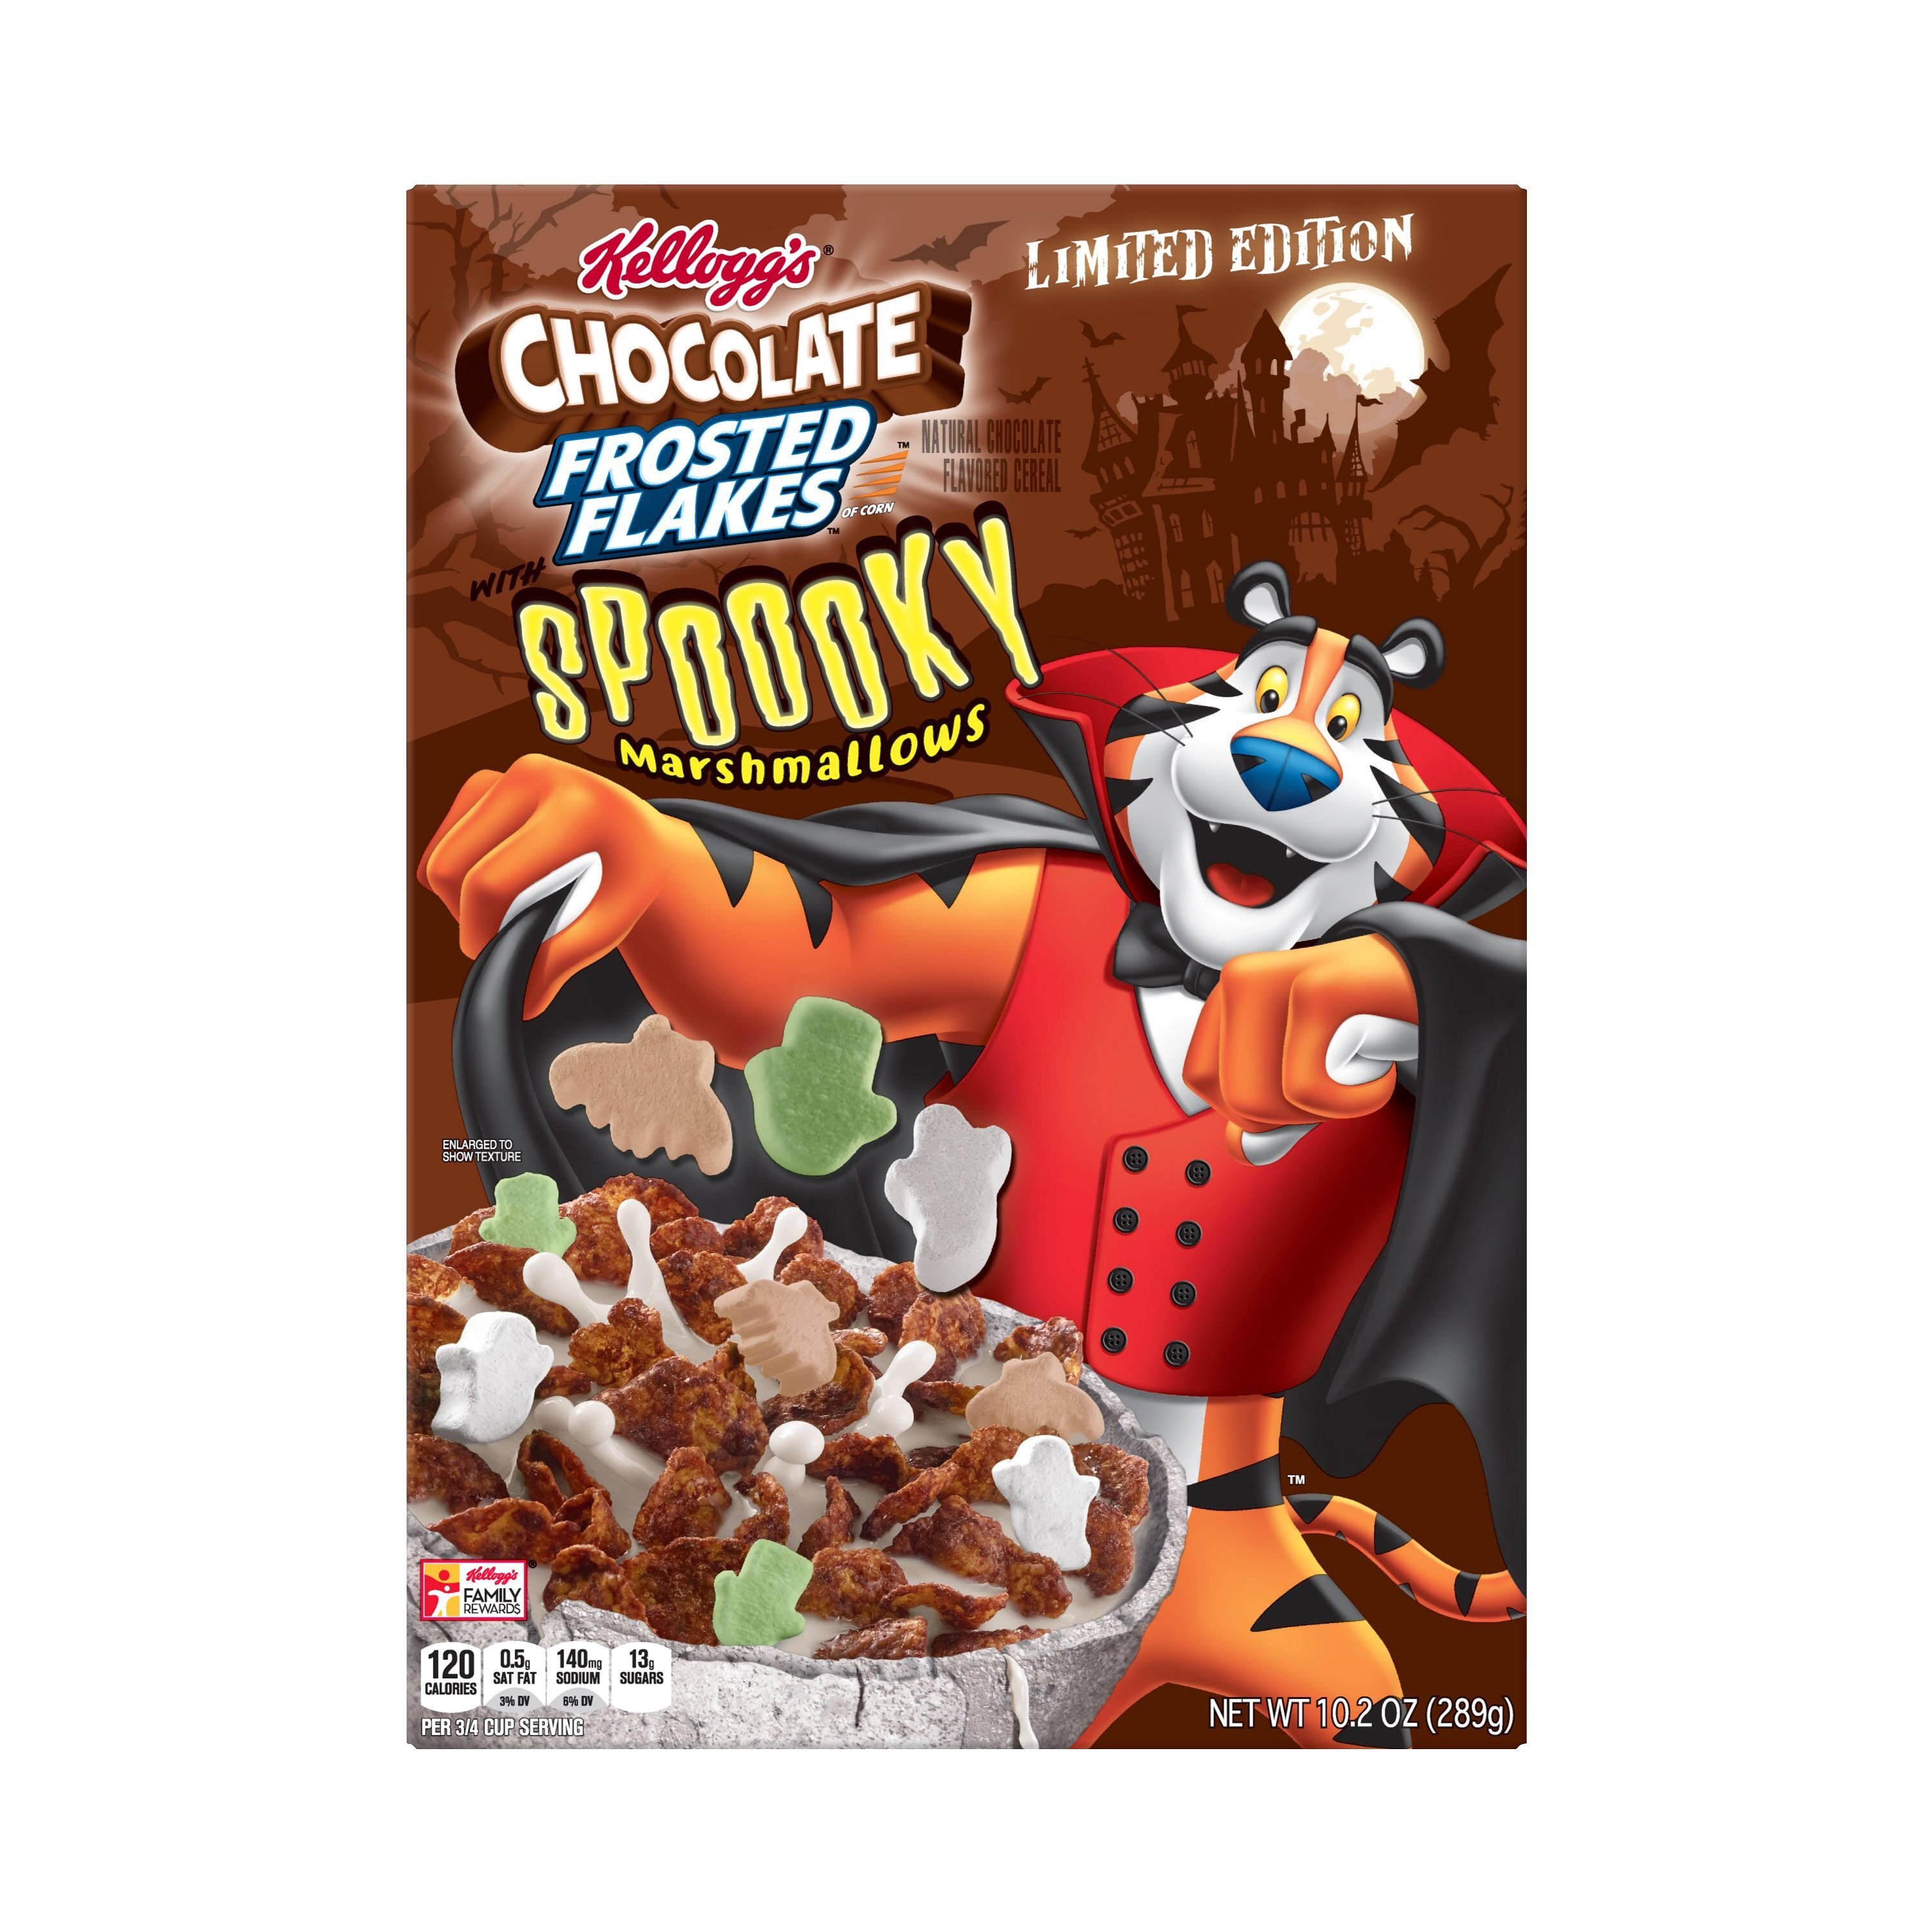 News Kellogg's Halloween Cereals are Getting a Monstrous Marshmallow